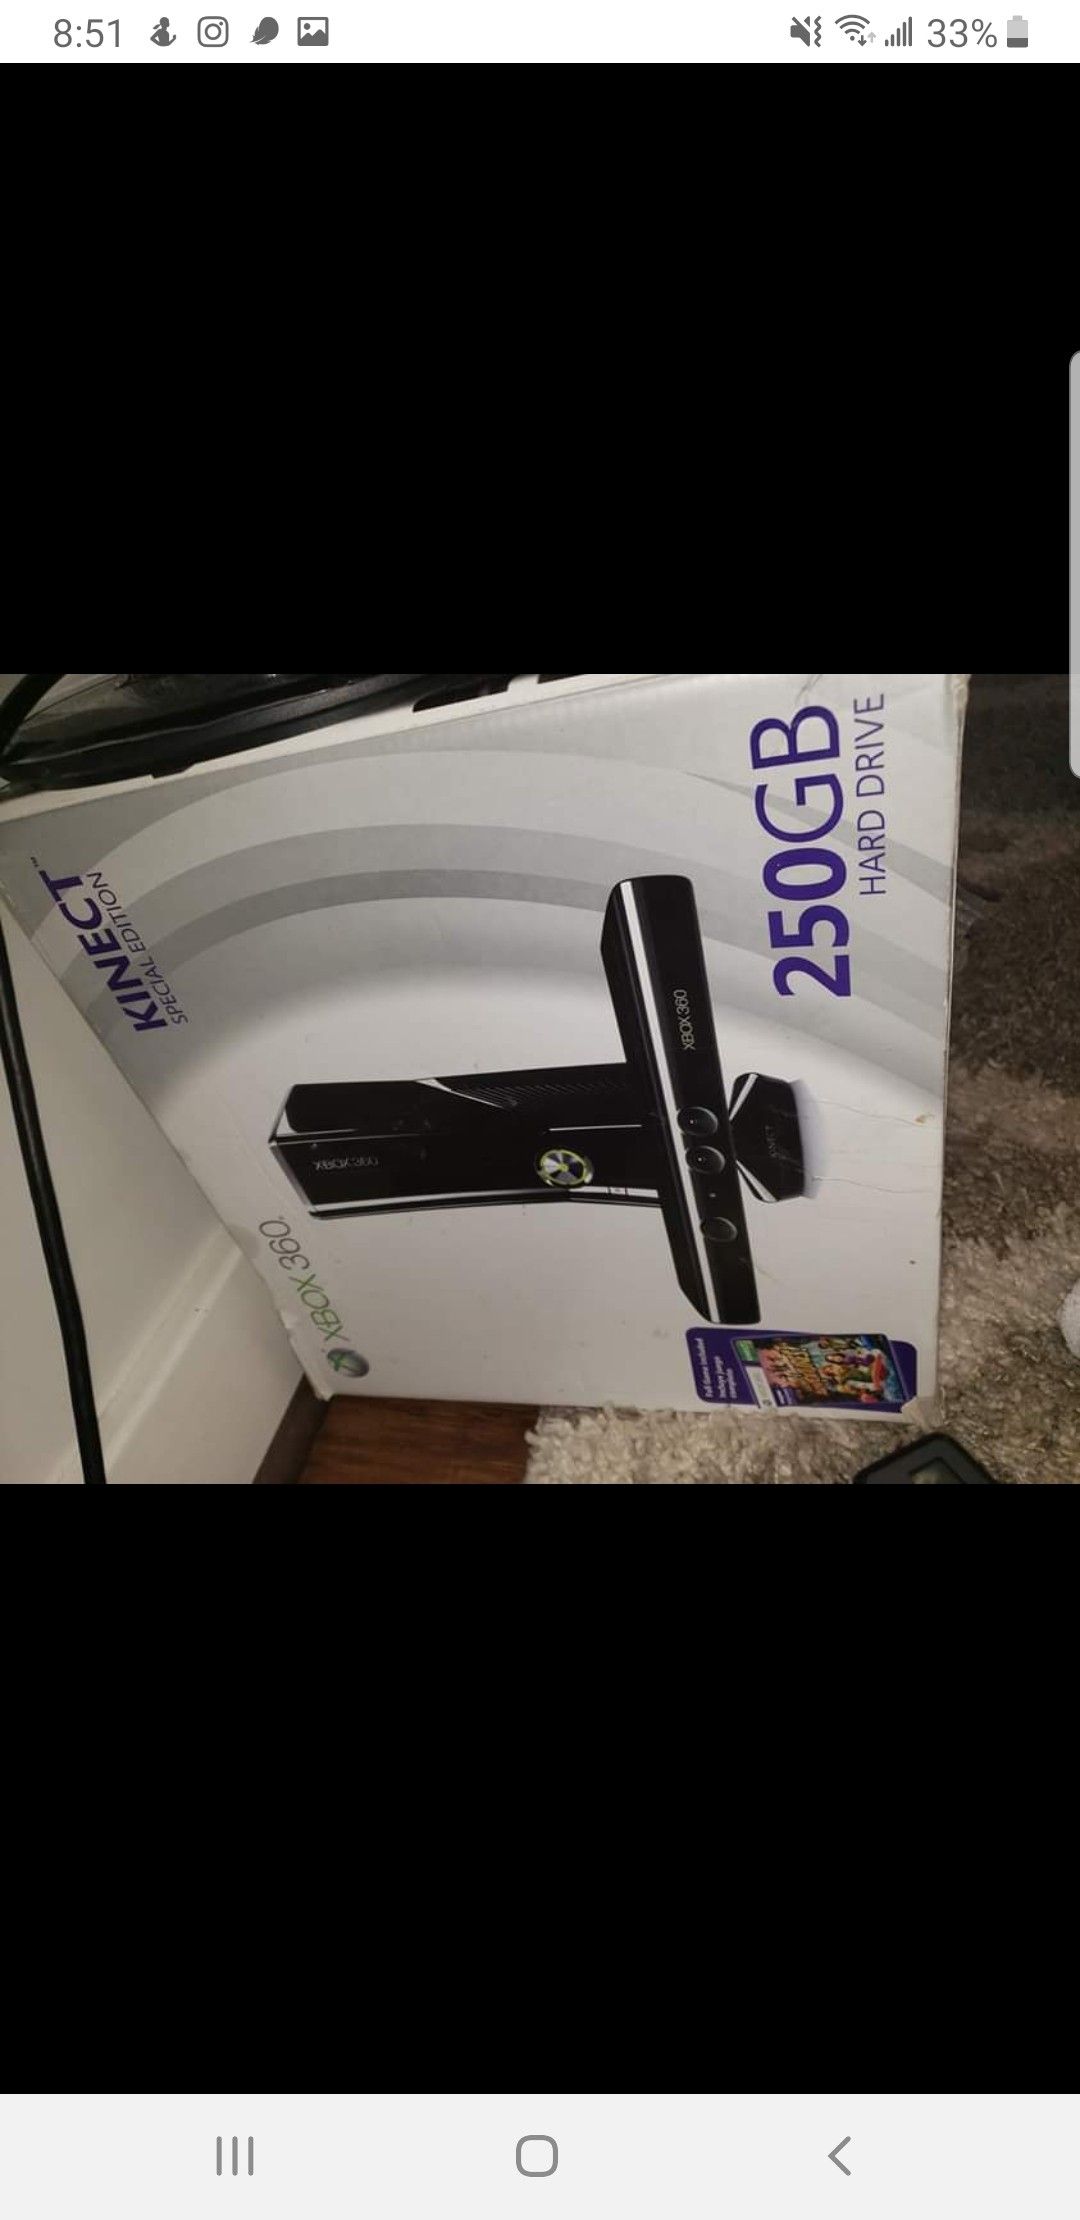 Xbox 360 with Kinect 250GB